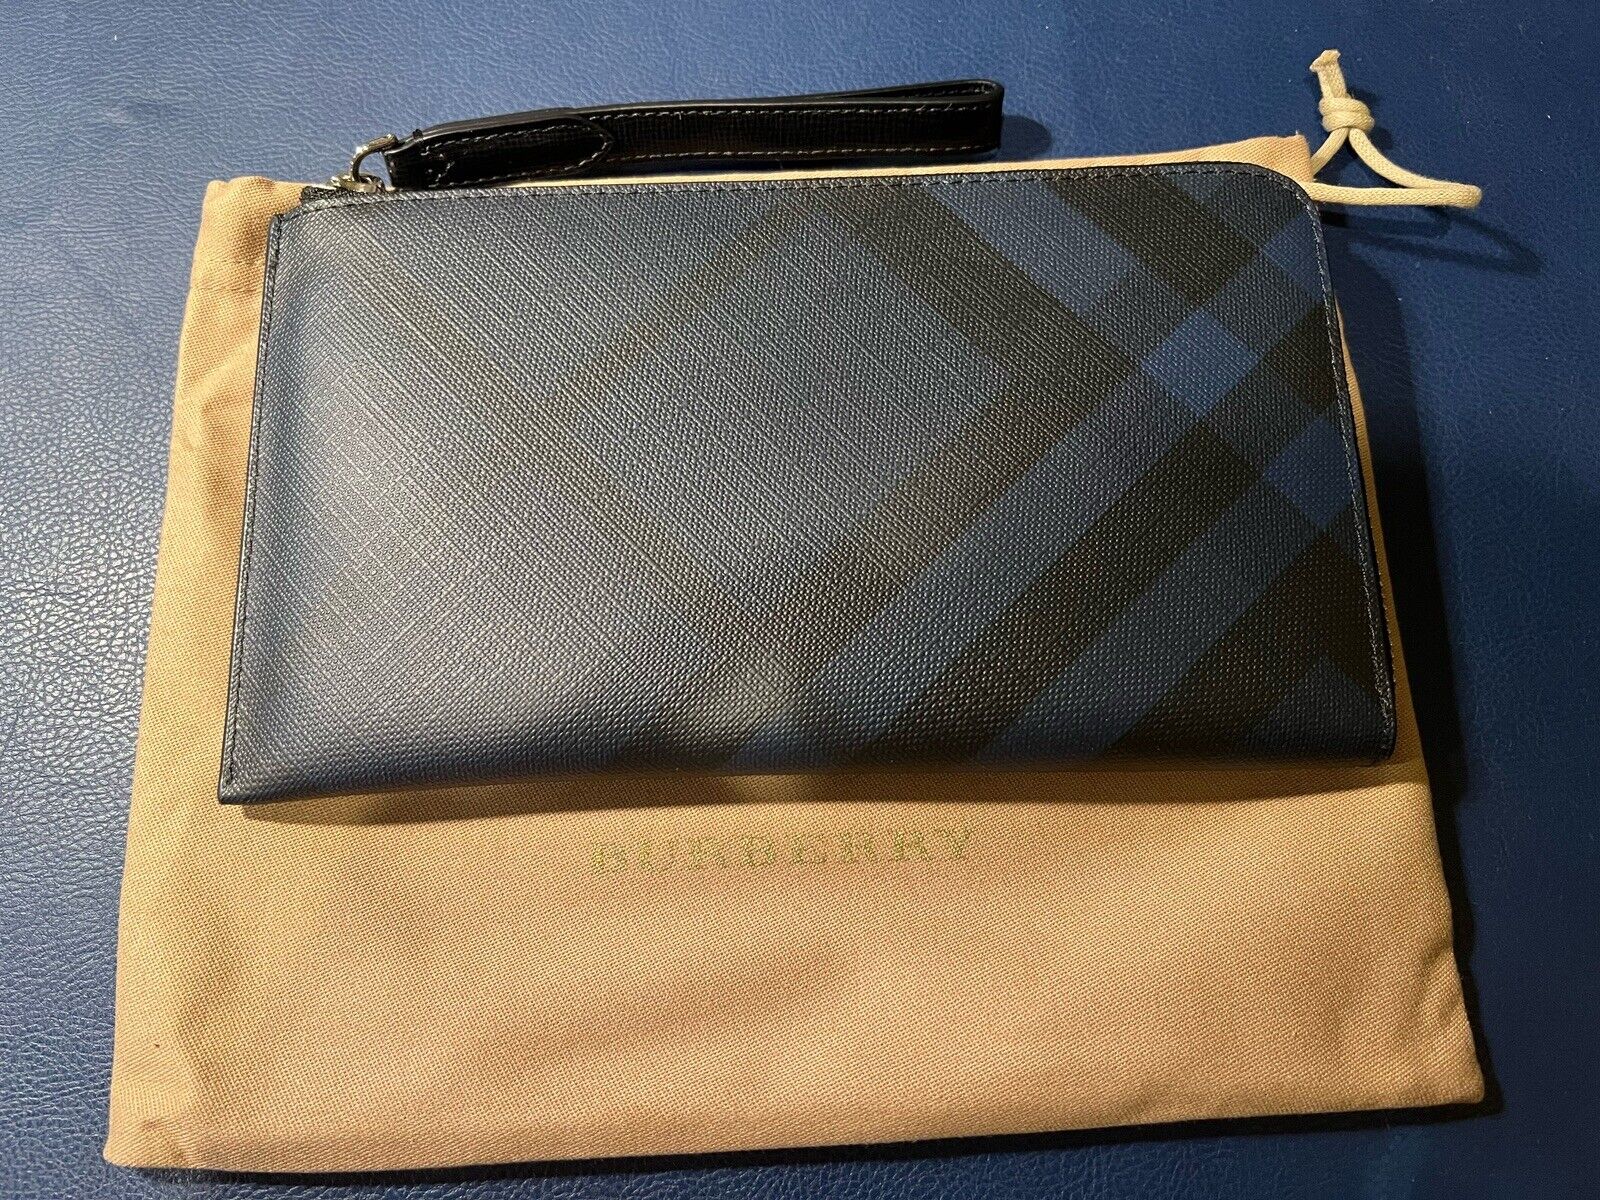 Burberry Navy Blue/Black London Check Canvas And Leather Sandon Card Holder  Burberry